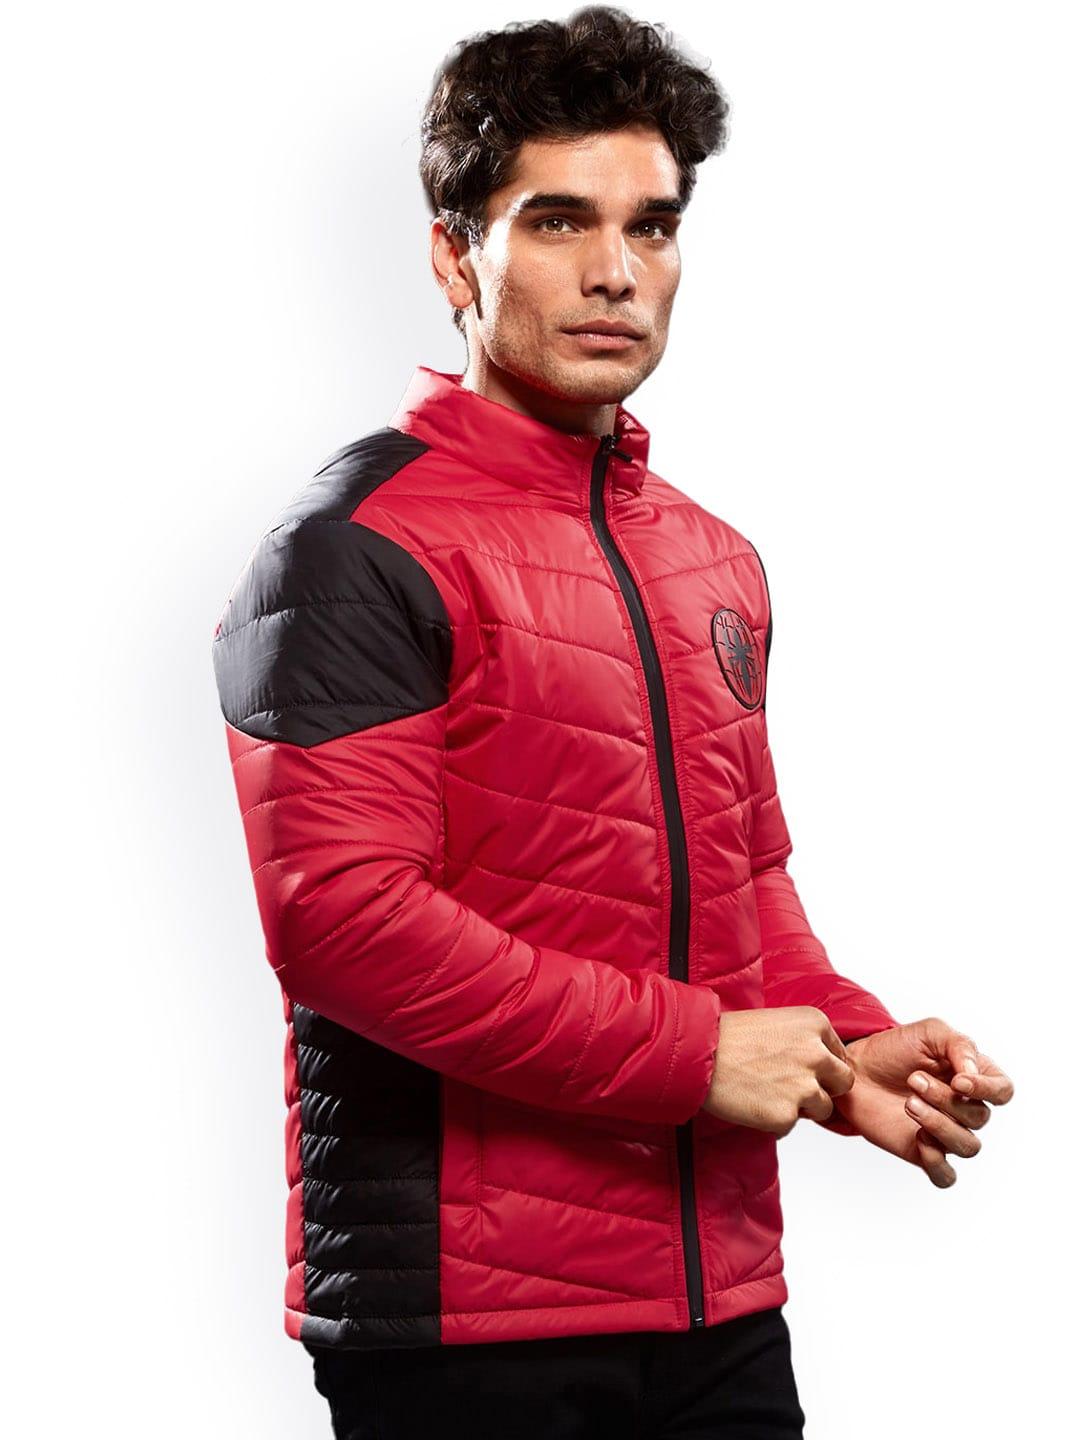 the souled store men red & black lightweight spider-man padded jacket